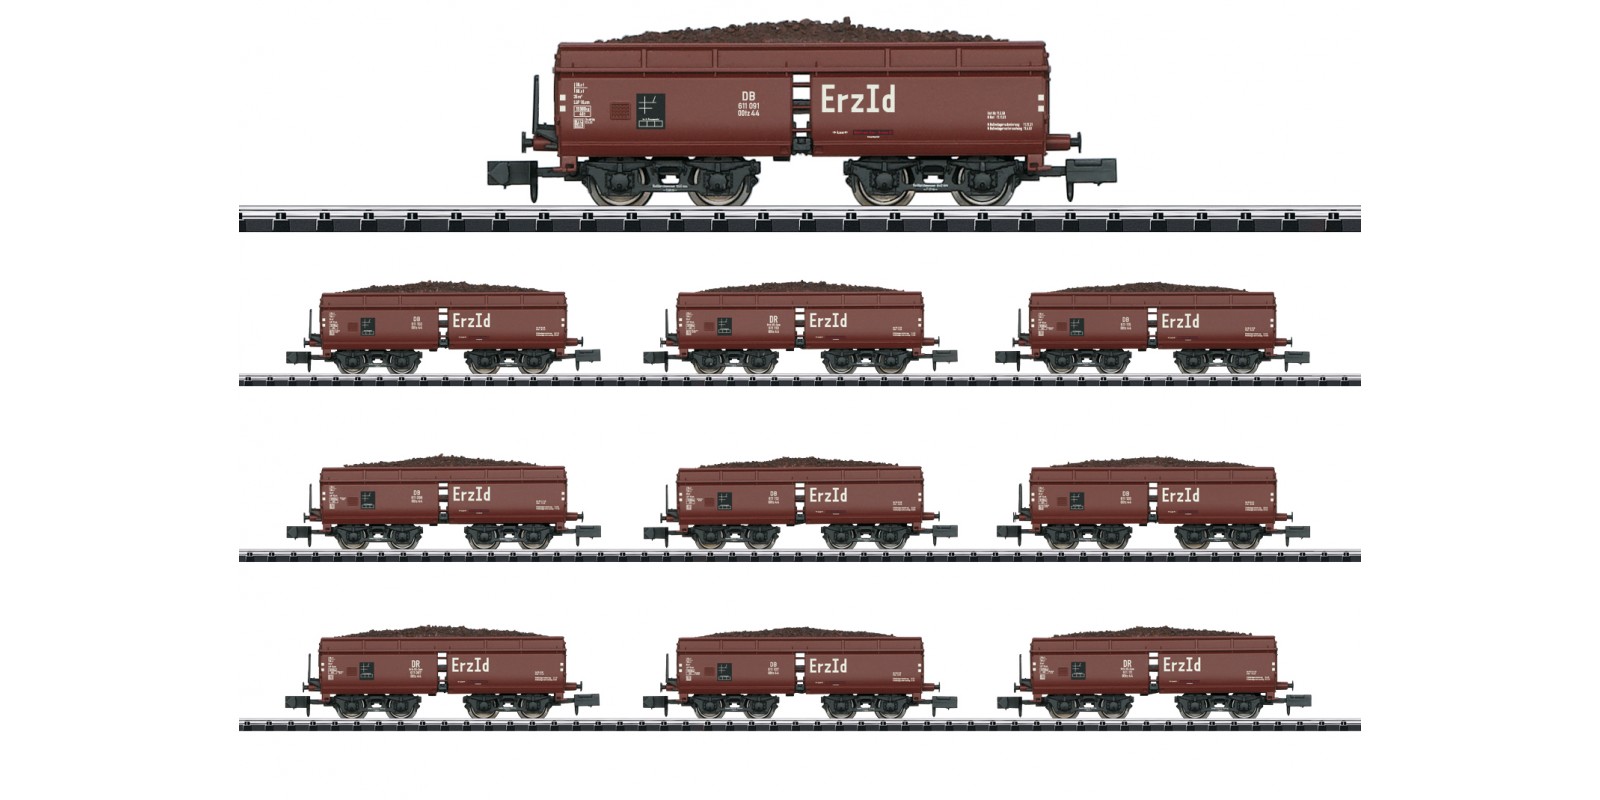 T15449 Display with 10 Type Erz Id Hopper Cars